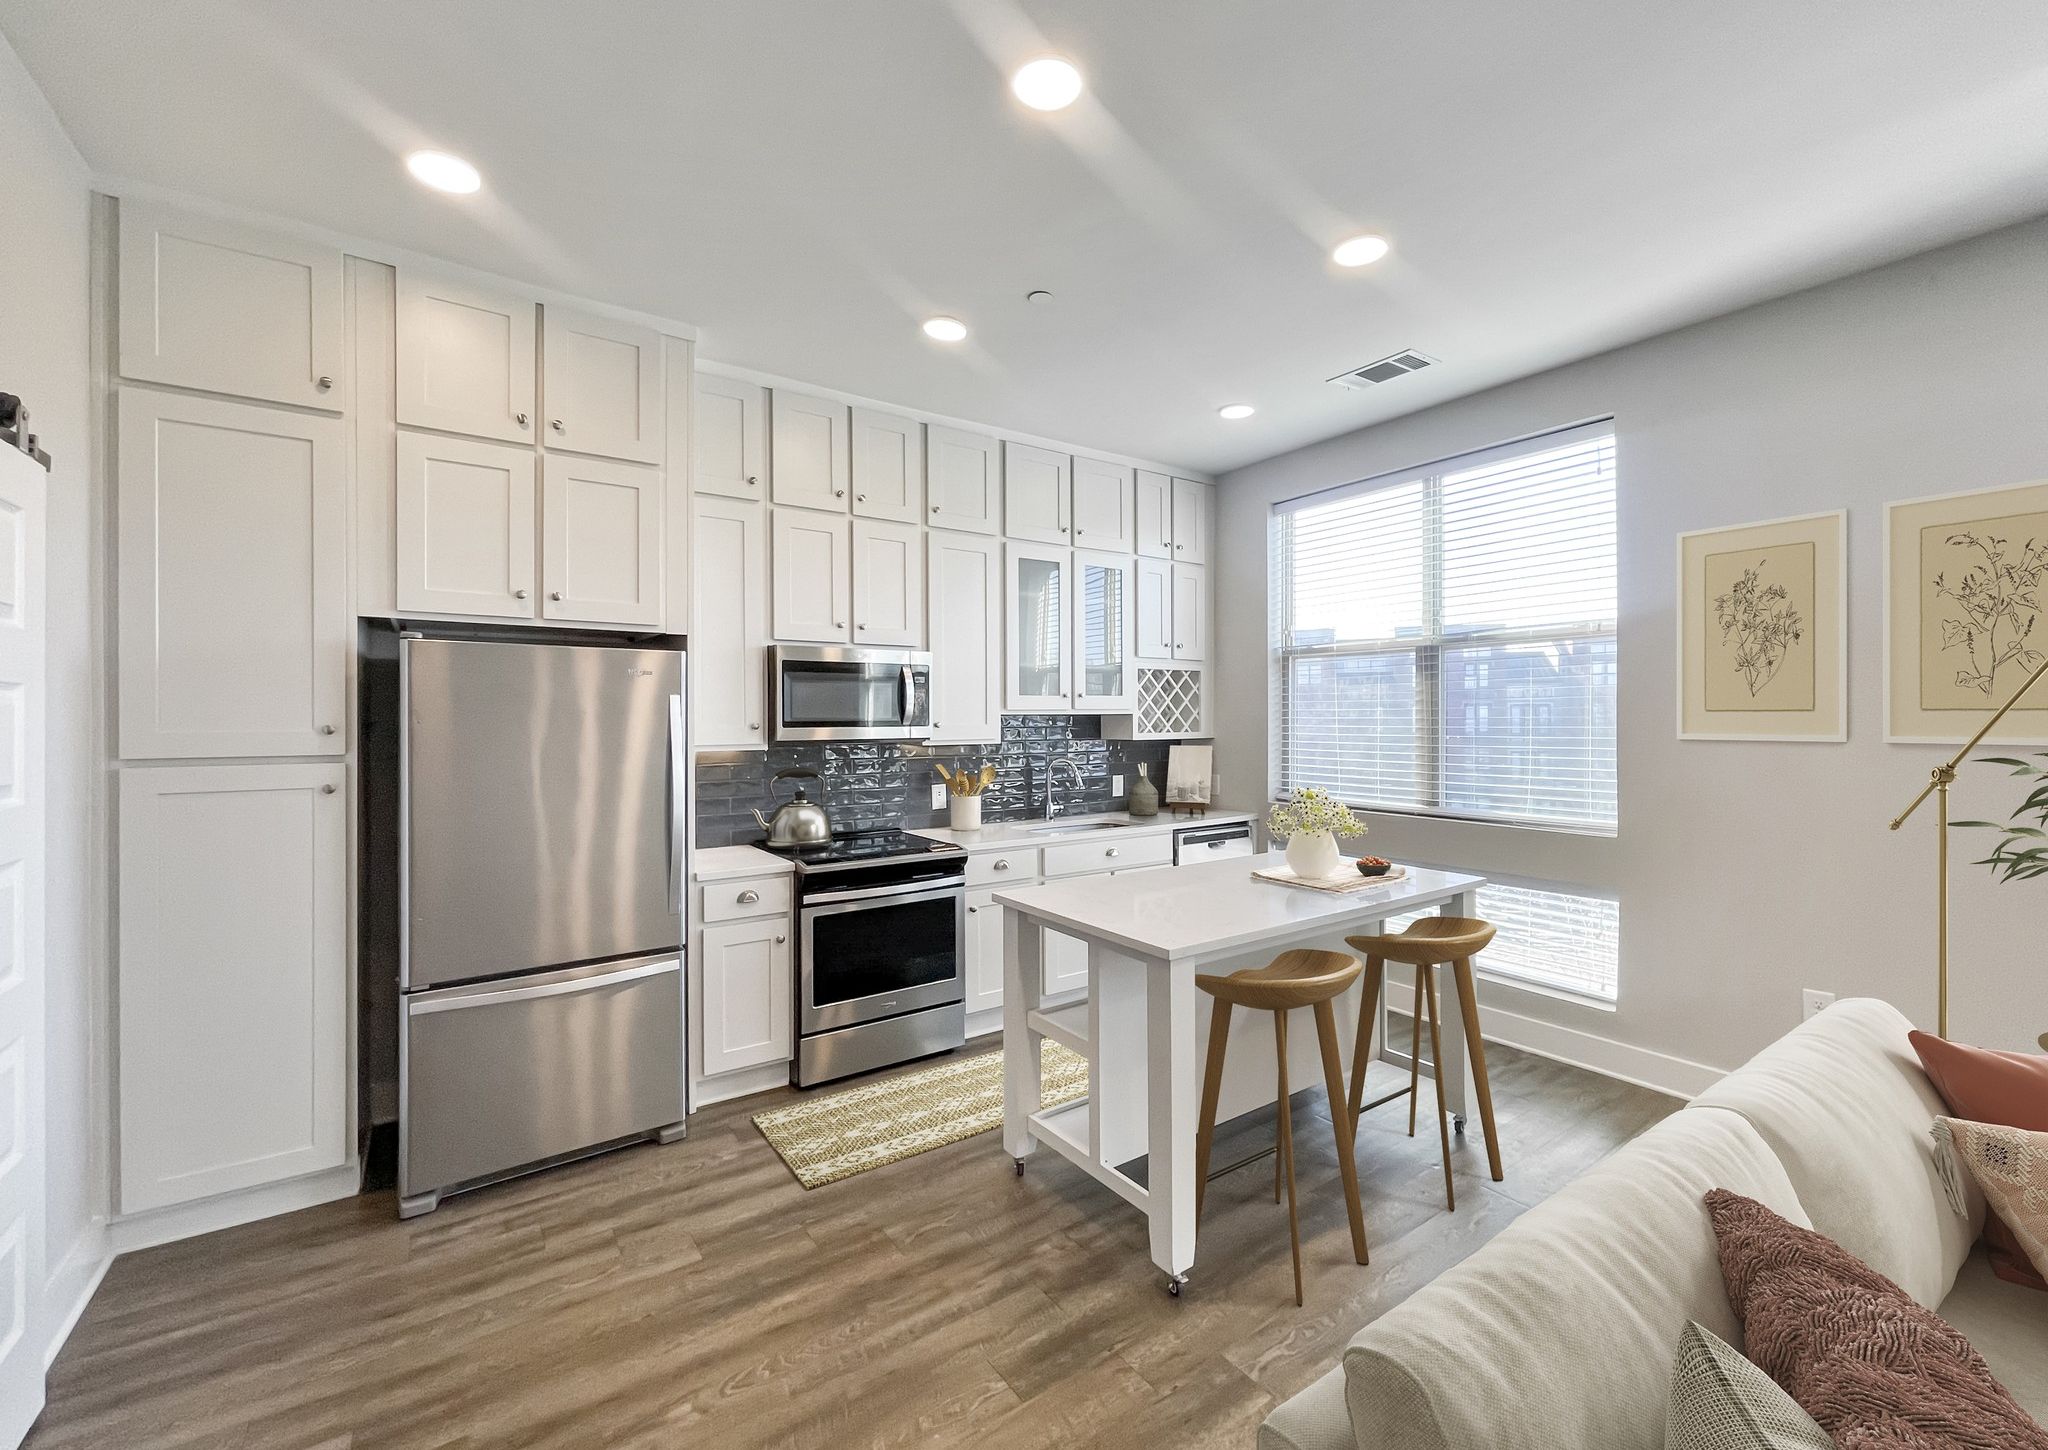 Luxury apartment kitchen with moveable kitchen island and stainless steel appliances